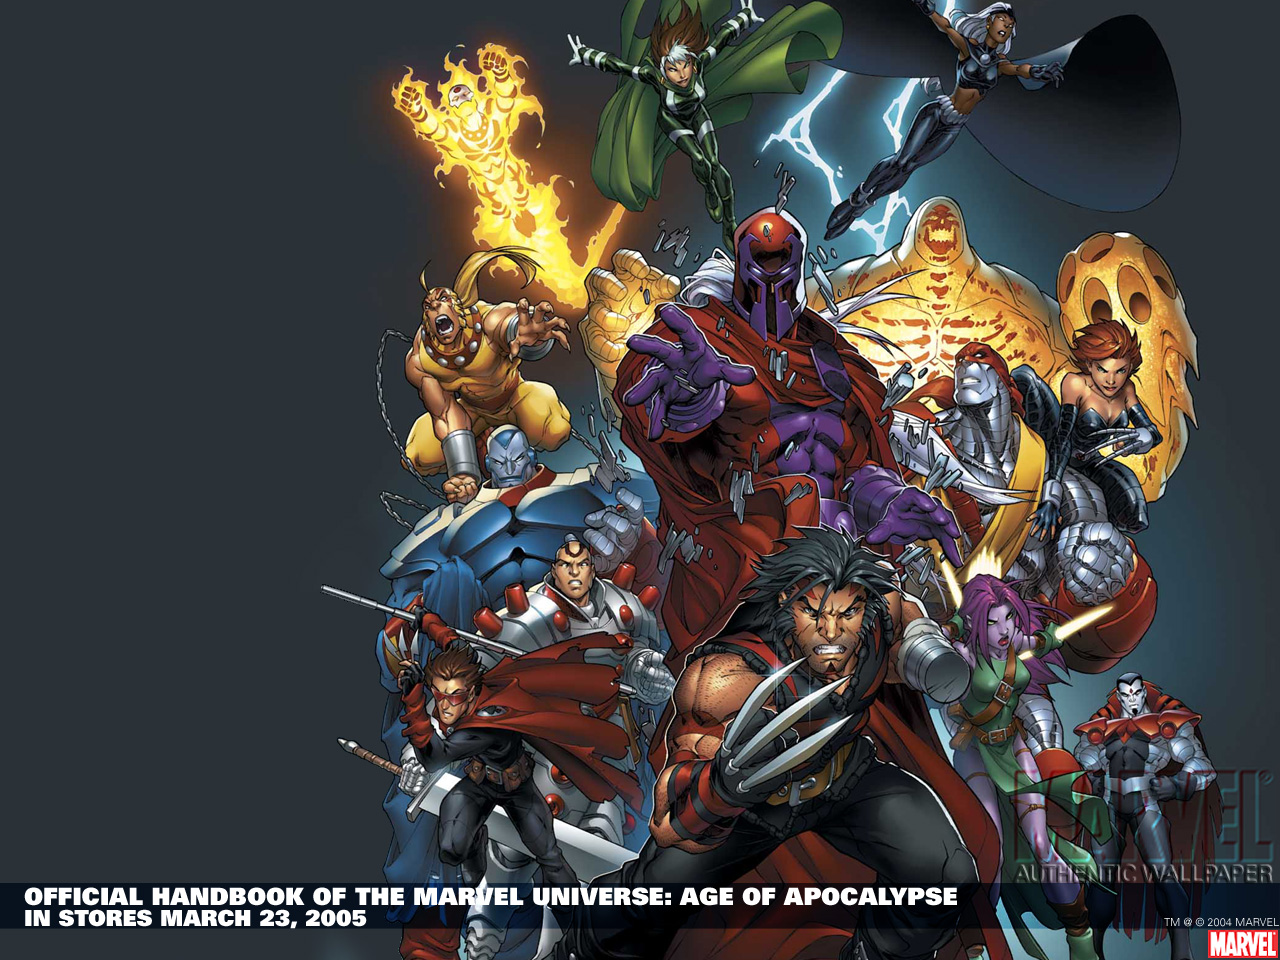 marvel heroes hd wallpaper,action adventure game,fictional character,pc game,cg artwork,warlord